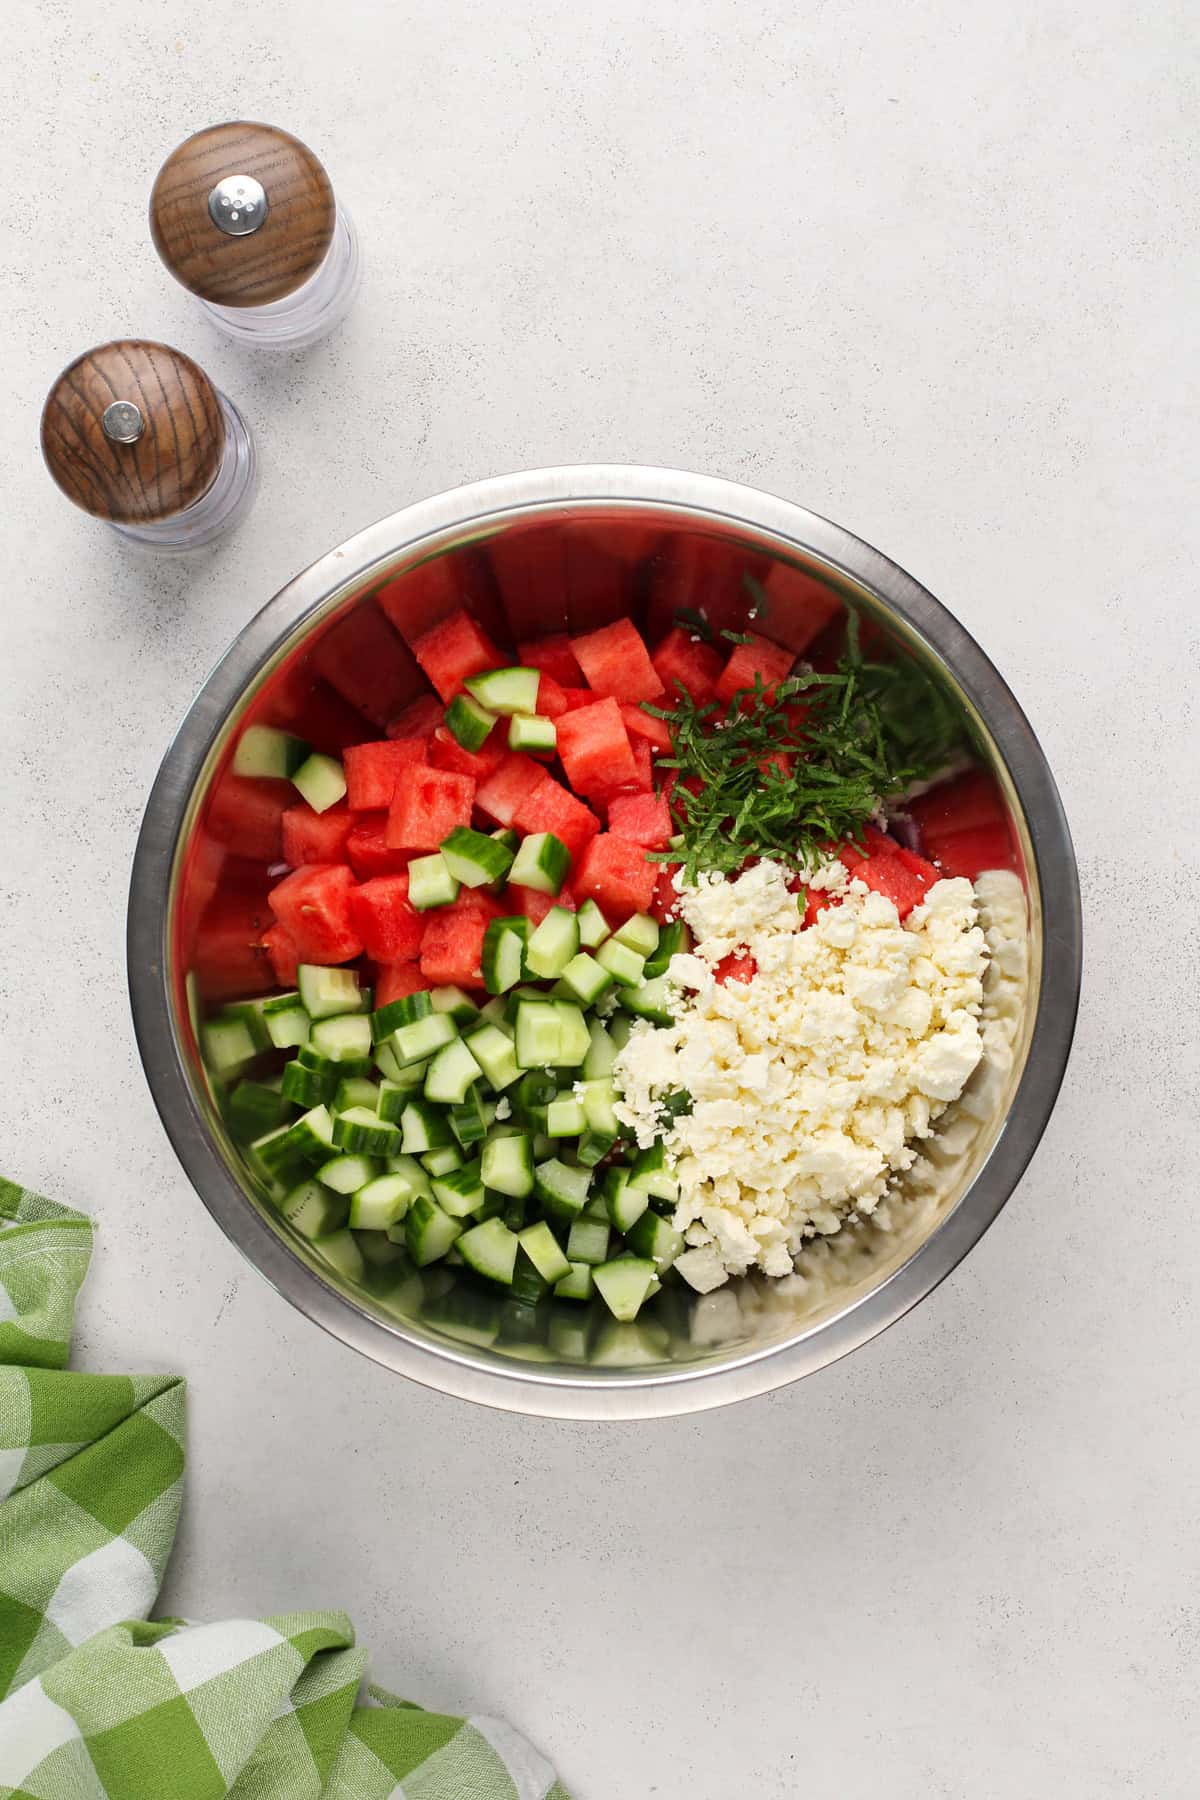 Ingredients for watermelon feta salad added to a metal bowl.